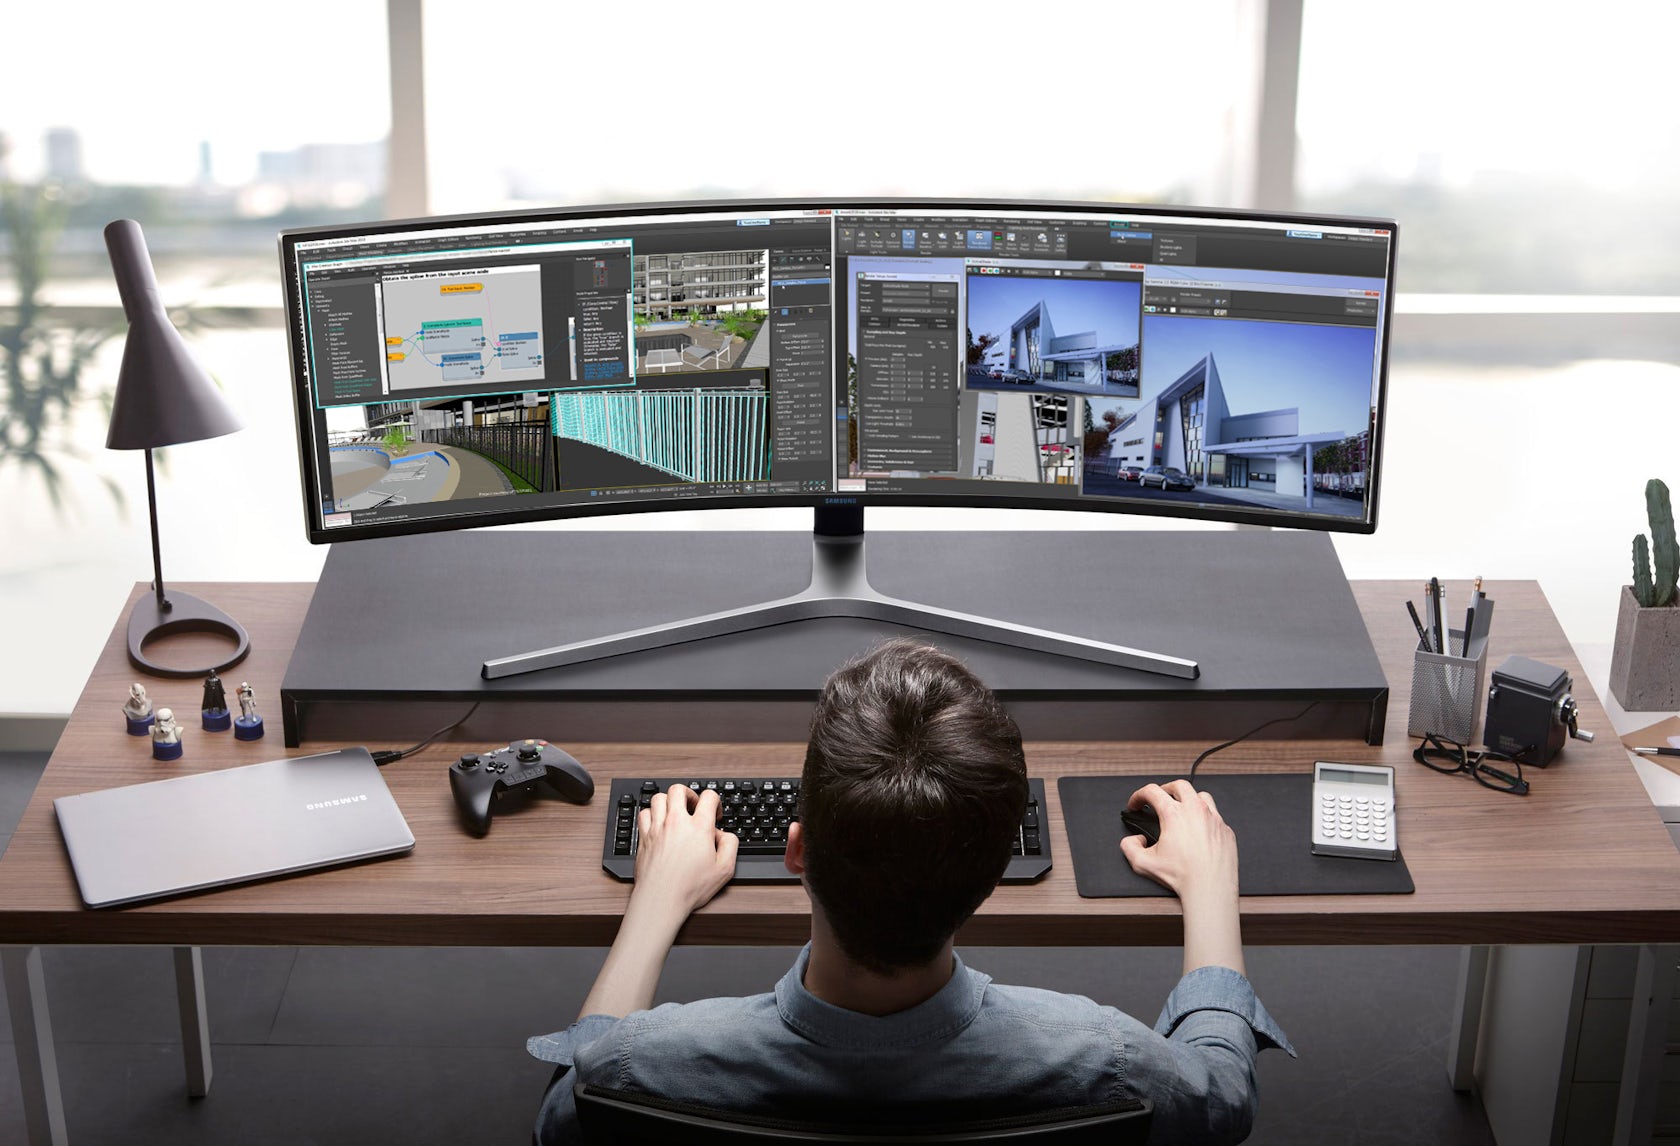 The World's Widest Computer Monitor: Expensive Gimmick or Architect's  Dream? - Architizer Journal